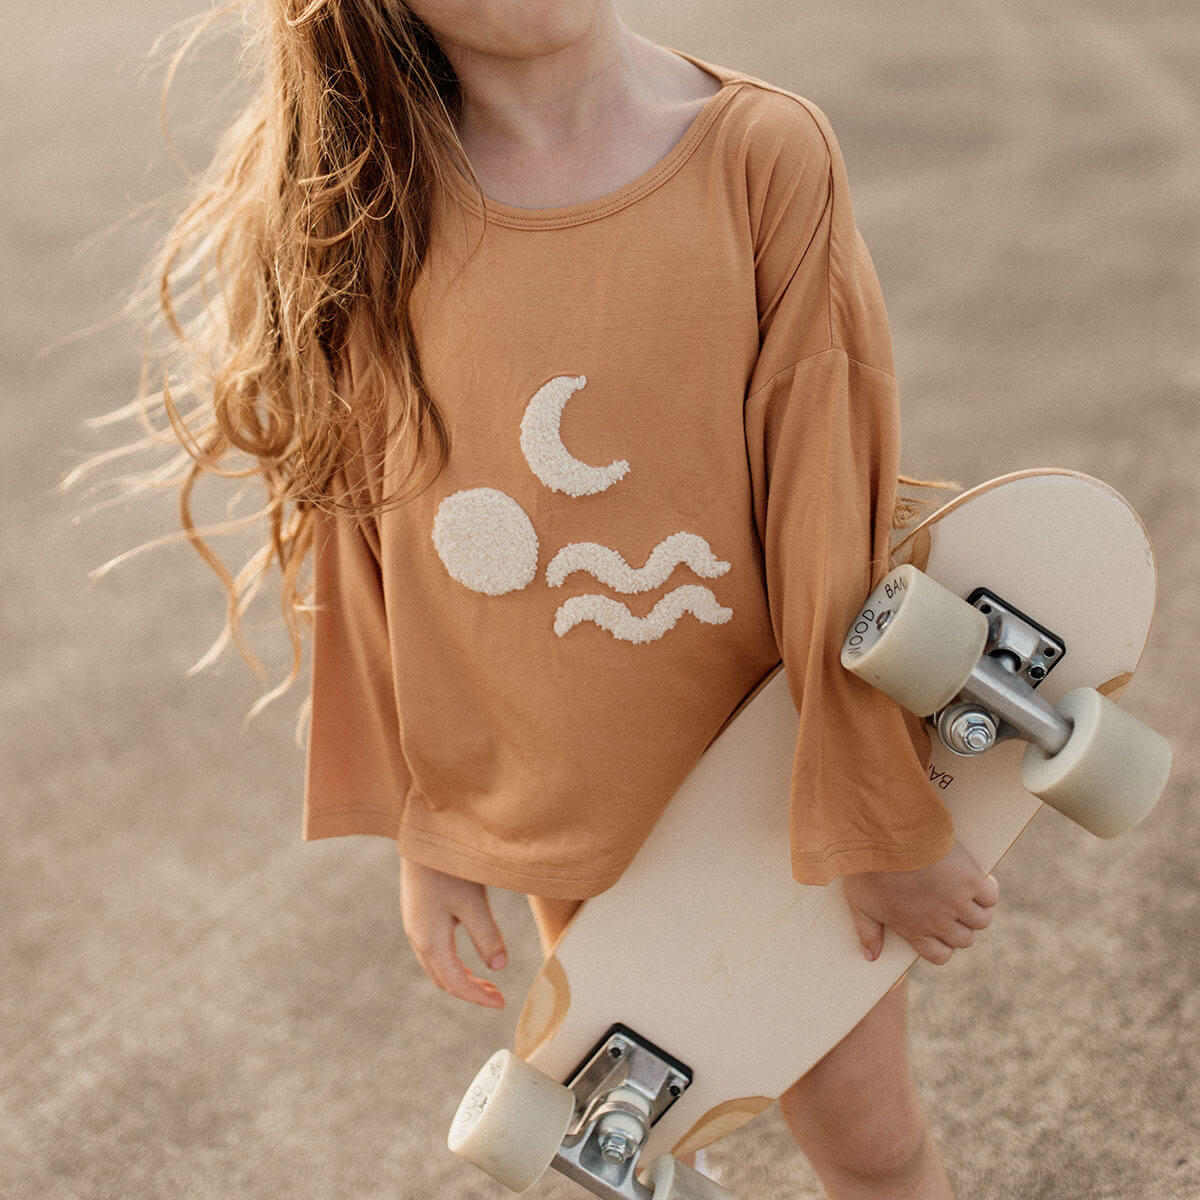 Childrens long sleeve box tee with embroidery